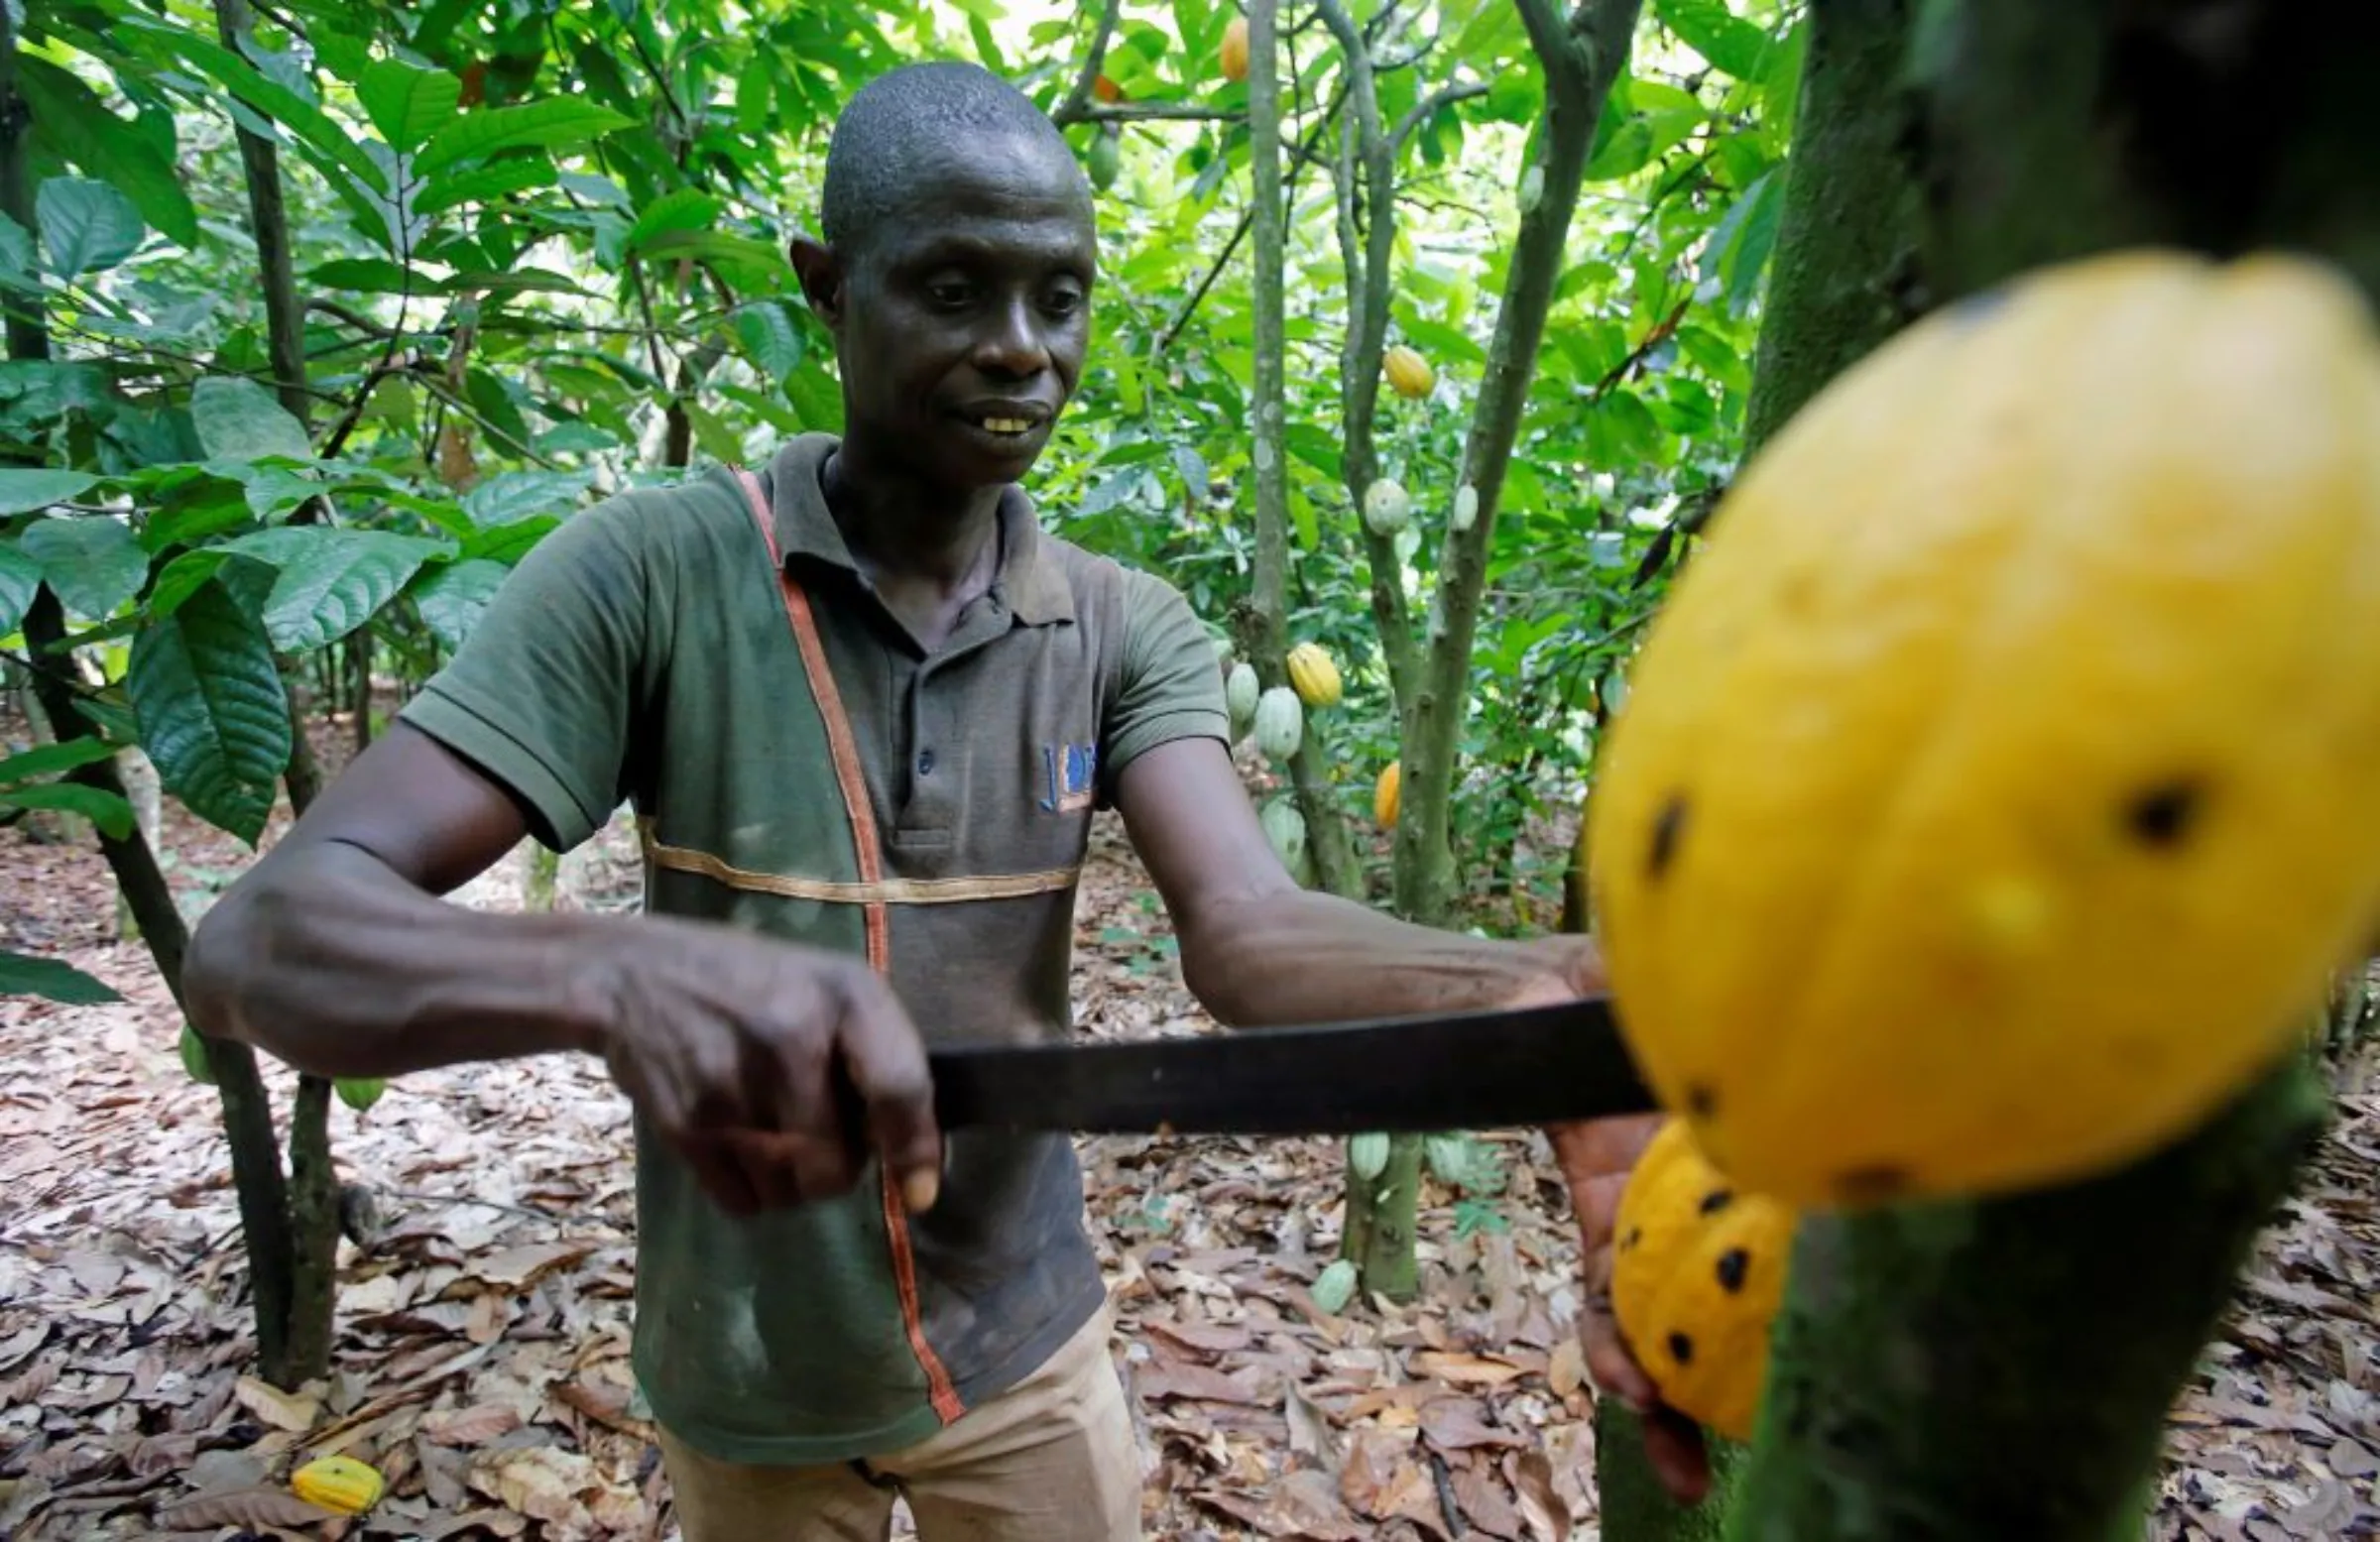 A man cuts a cocoa pod from a tree on a plantation in Toumodi, Ivory Coast October 13, 2018